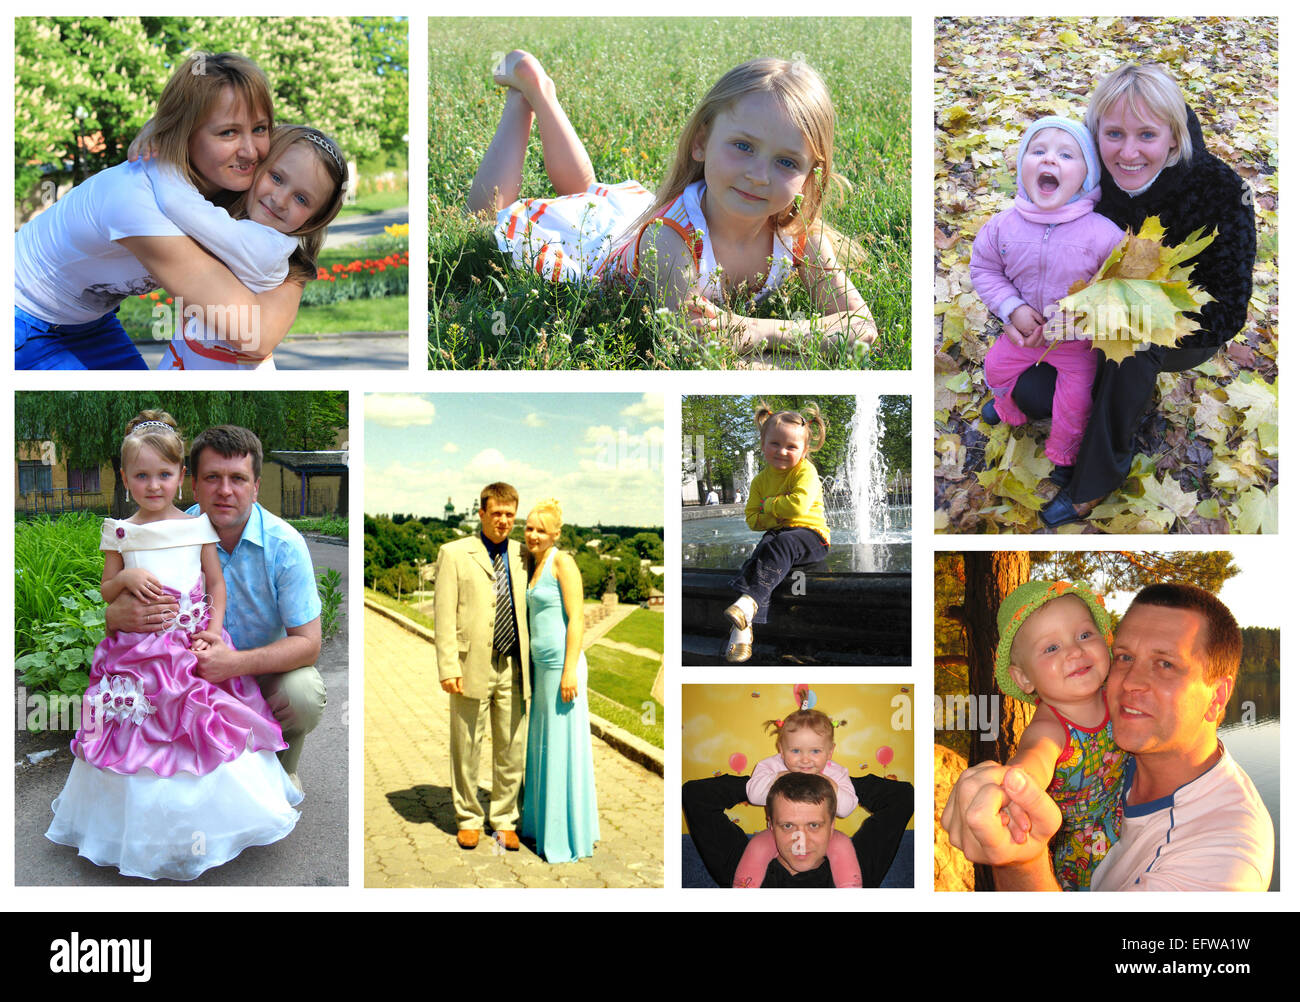 some different images from life of family Stock Photo